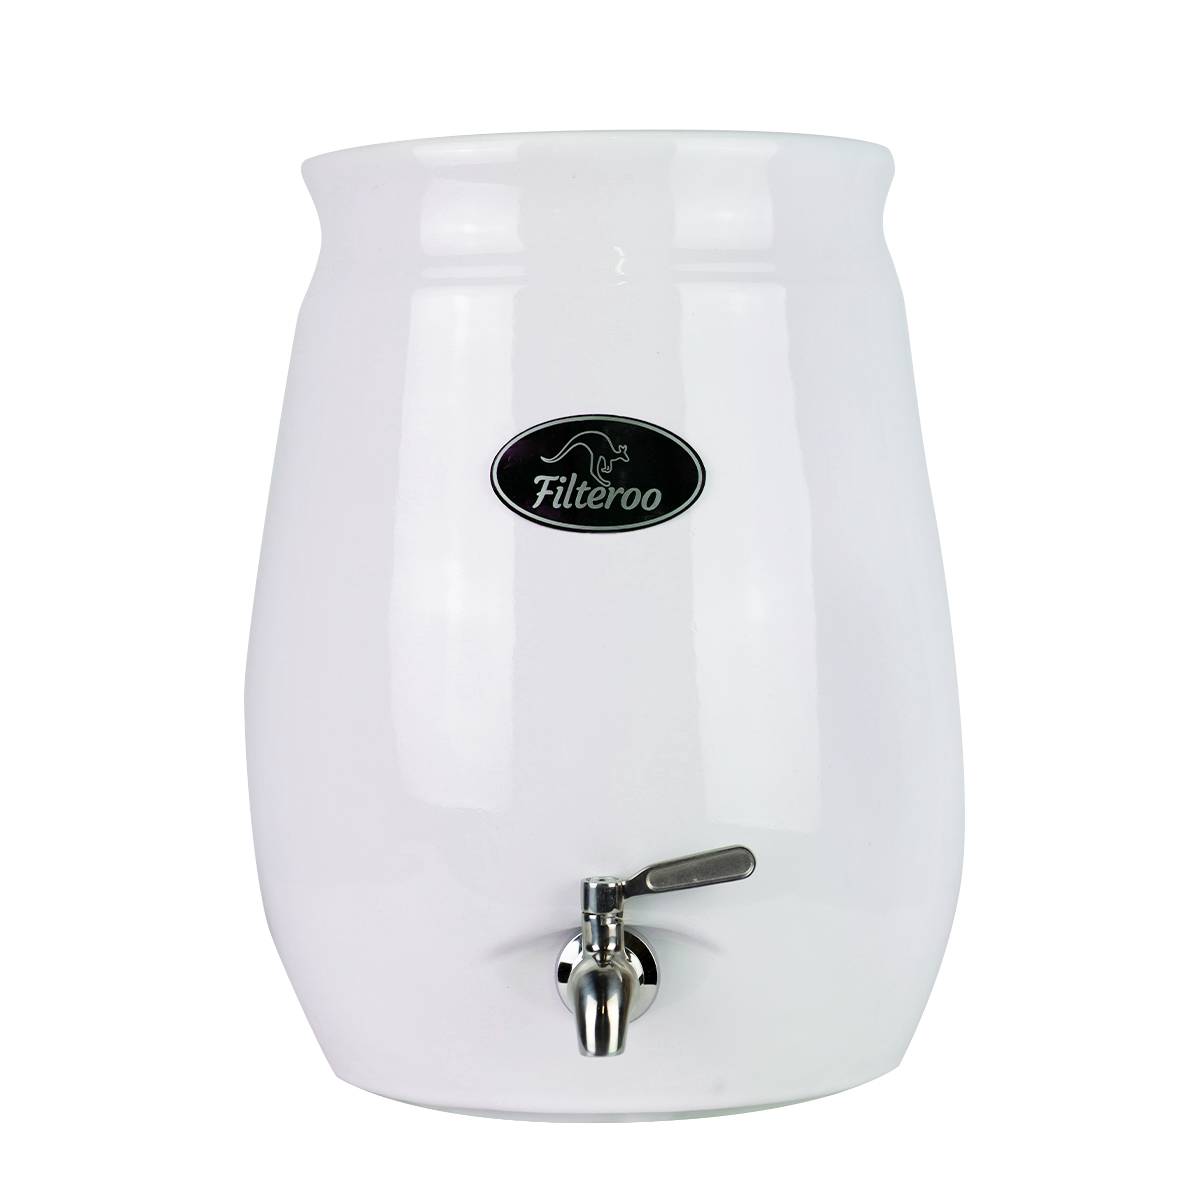 Filteroo® Joey 12L Gravity Ceramic Water Filter with Grander Revitalised Structured Water